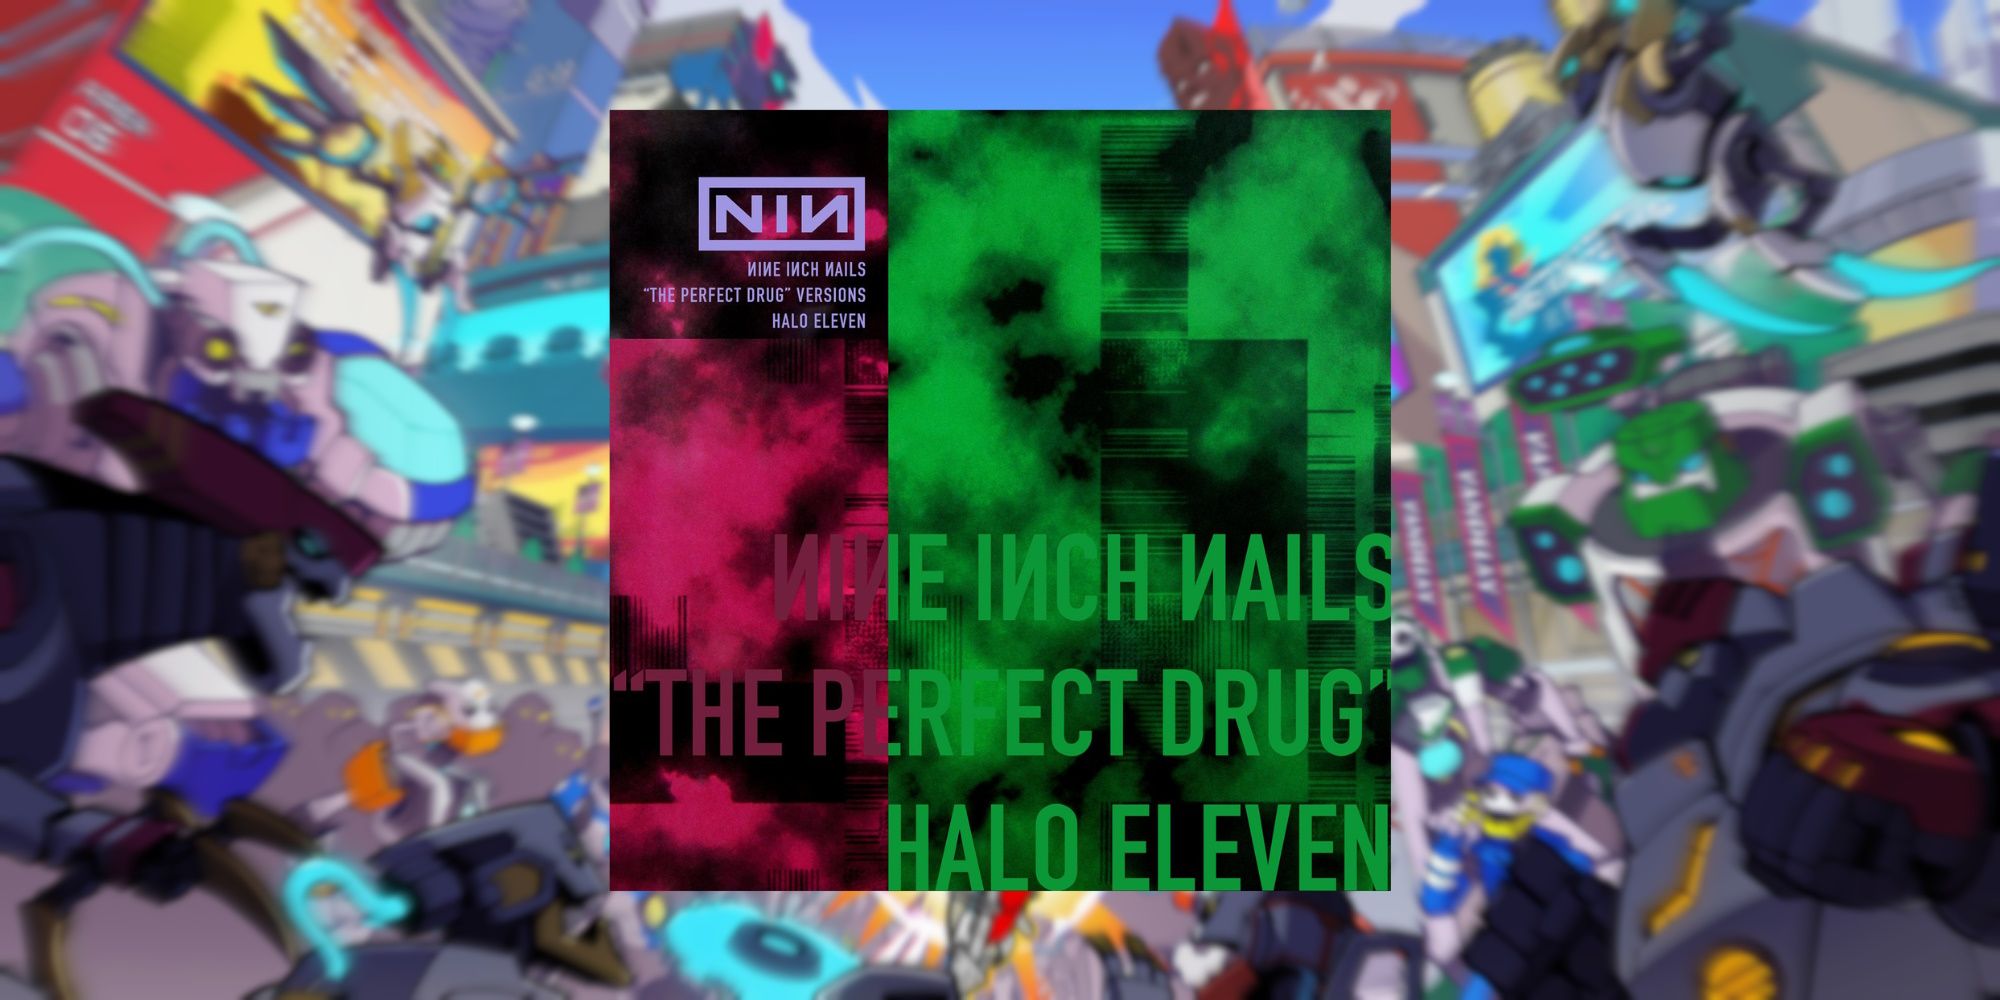 The album cover for The Perfect Drug